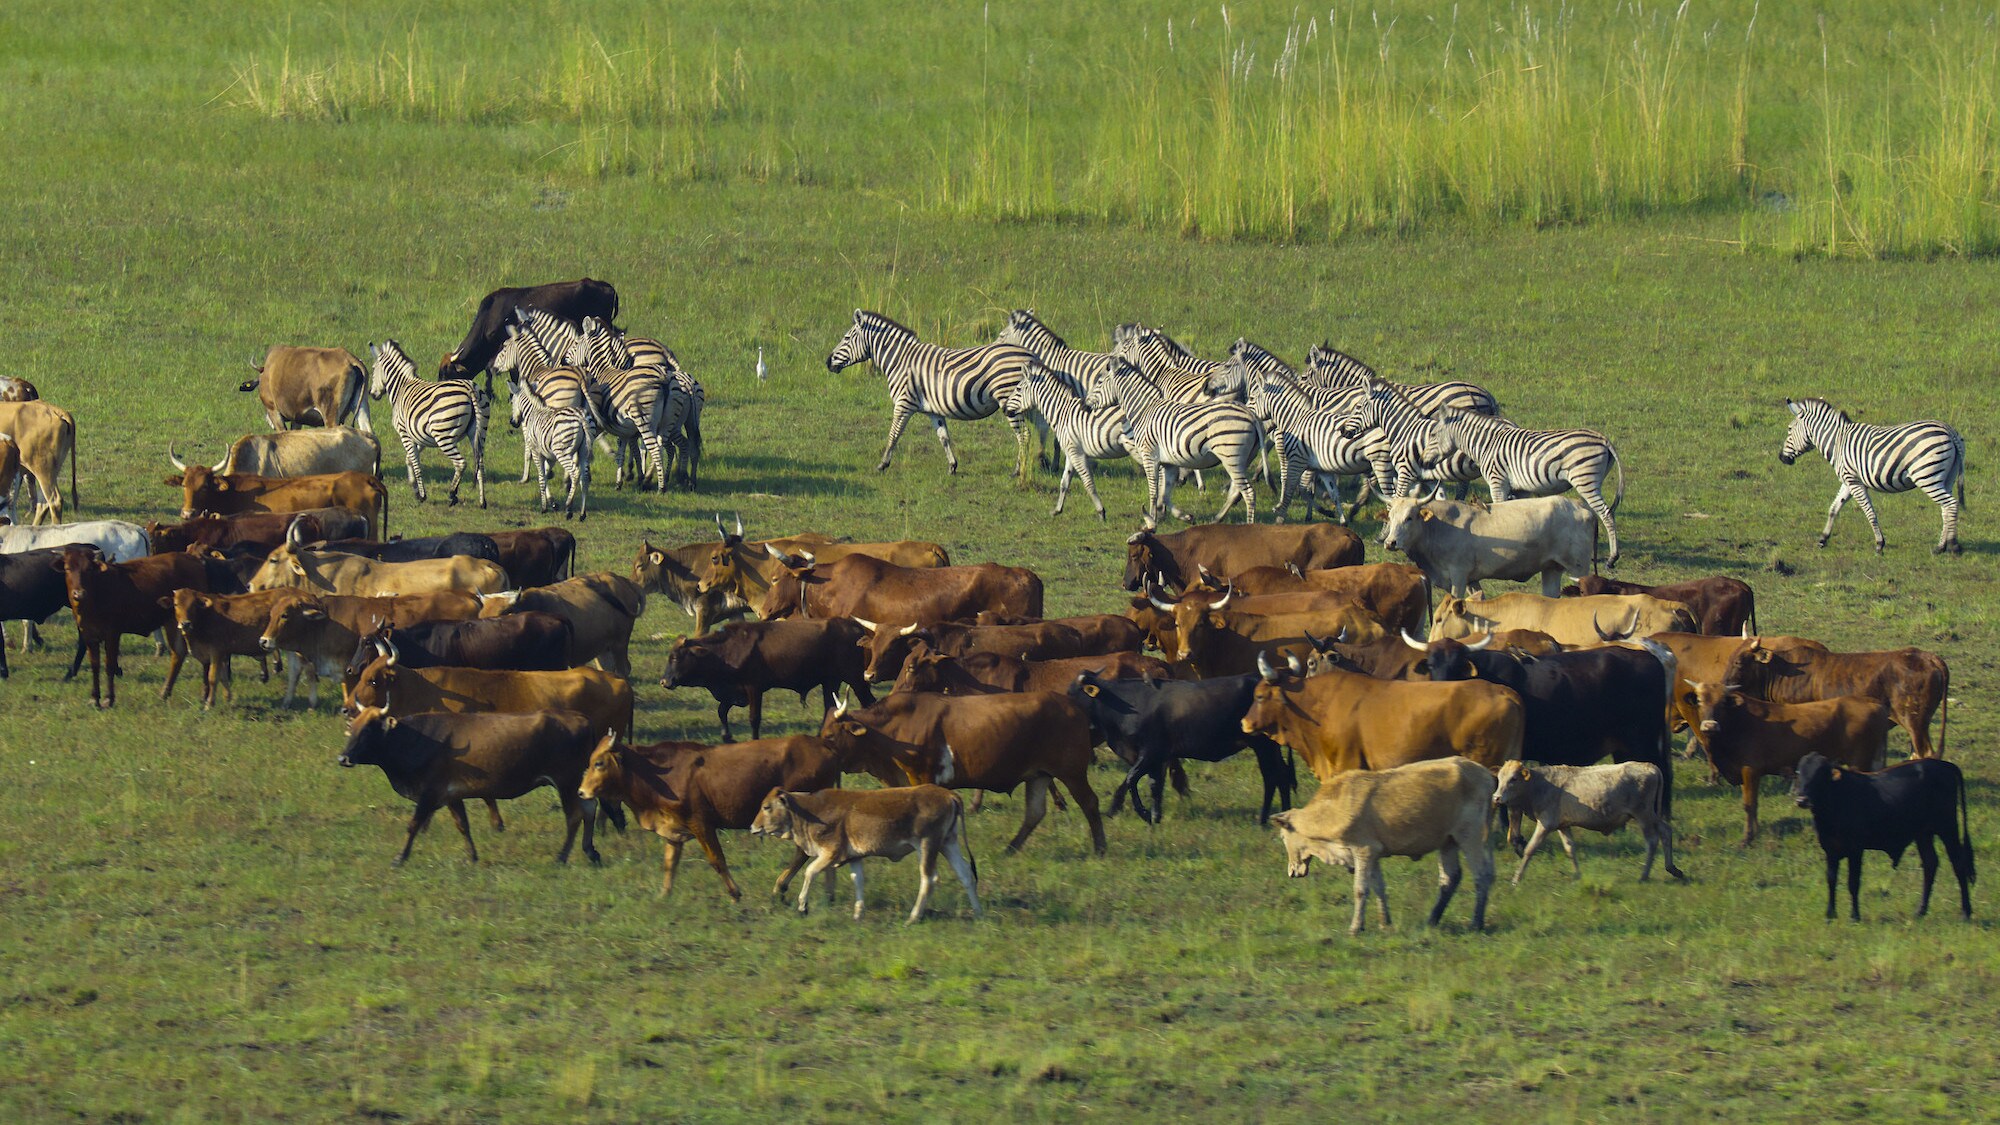 Cattle and Zebra on the plains. (National Geographic for Disney+/Bertie Gregory)